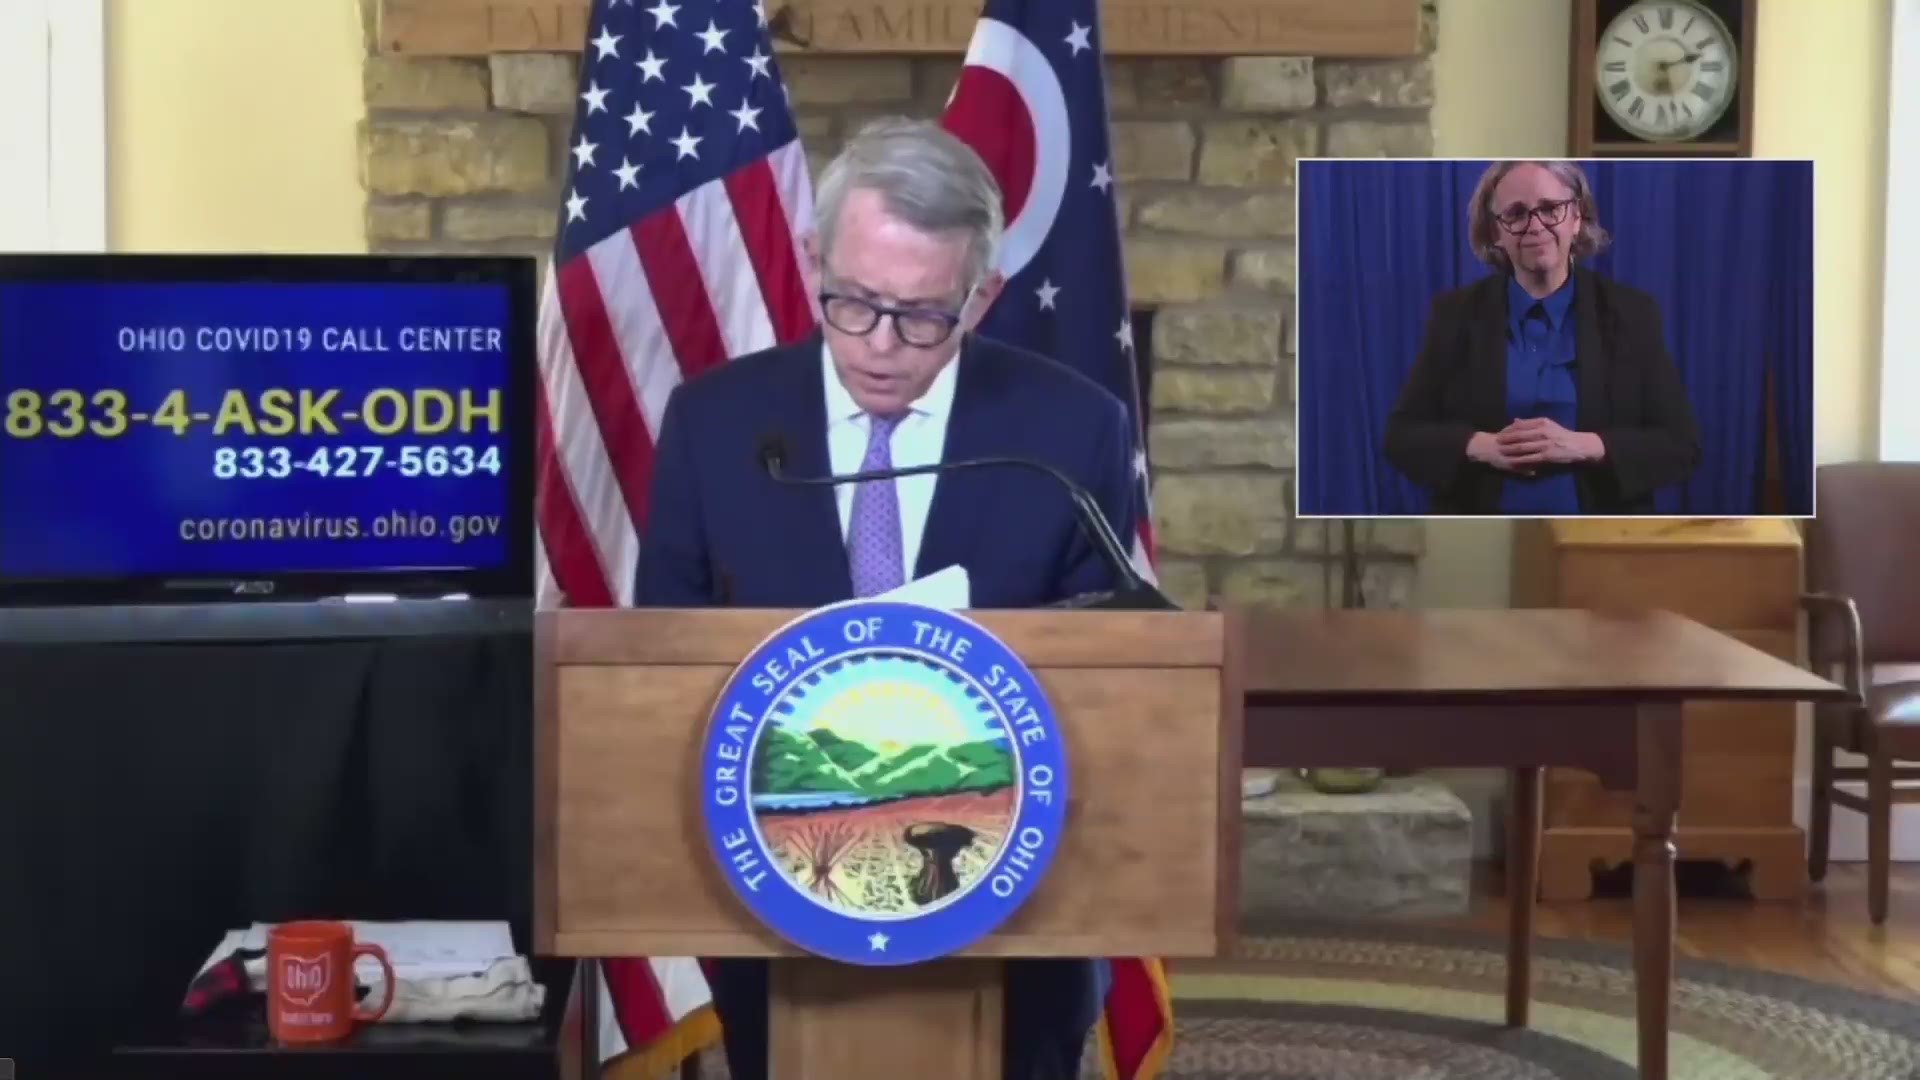 Kim Henderson was appointed by Governor Mike DeWine in January 2019.